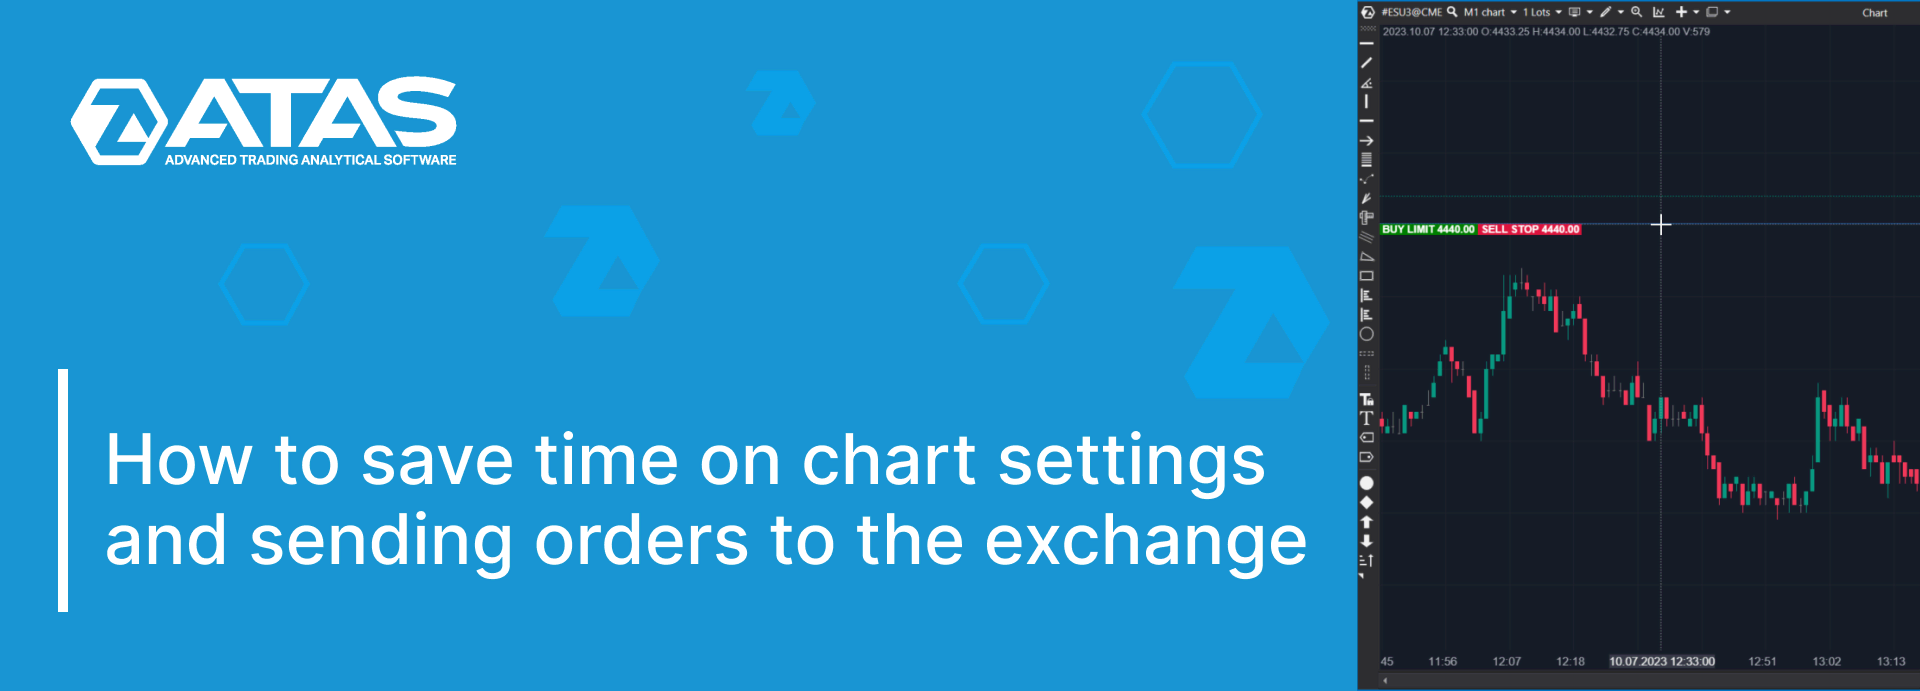 How to save time on chart settings and sending orders to the exchange